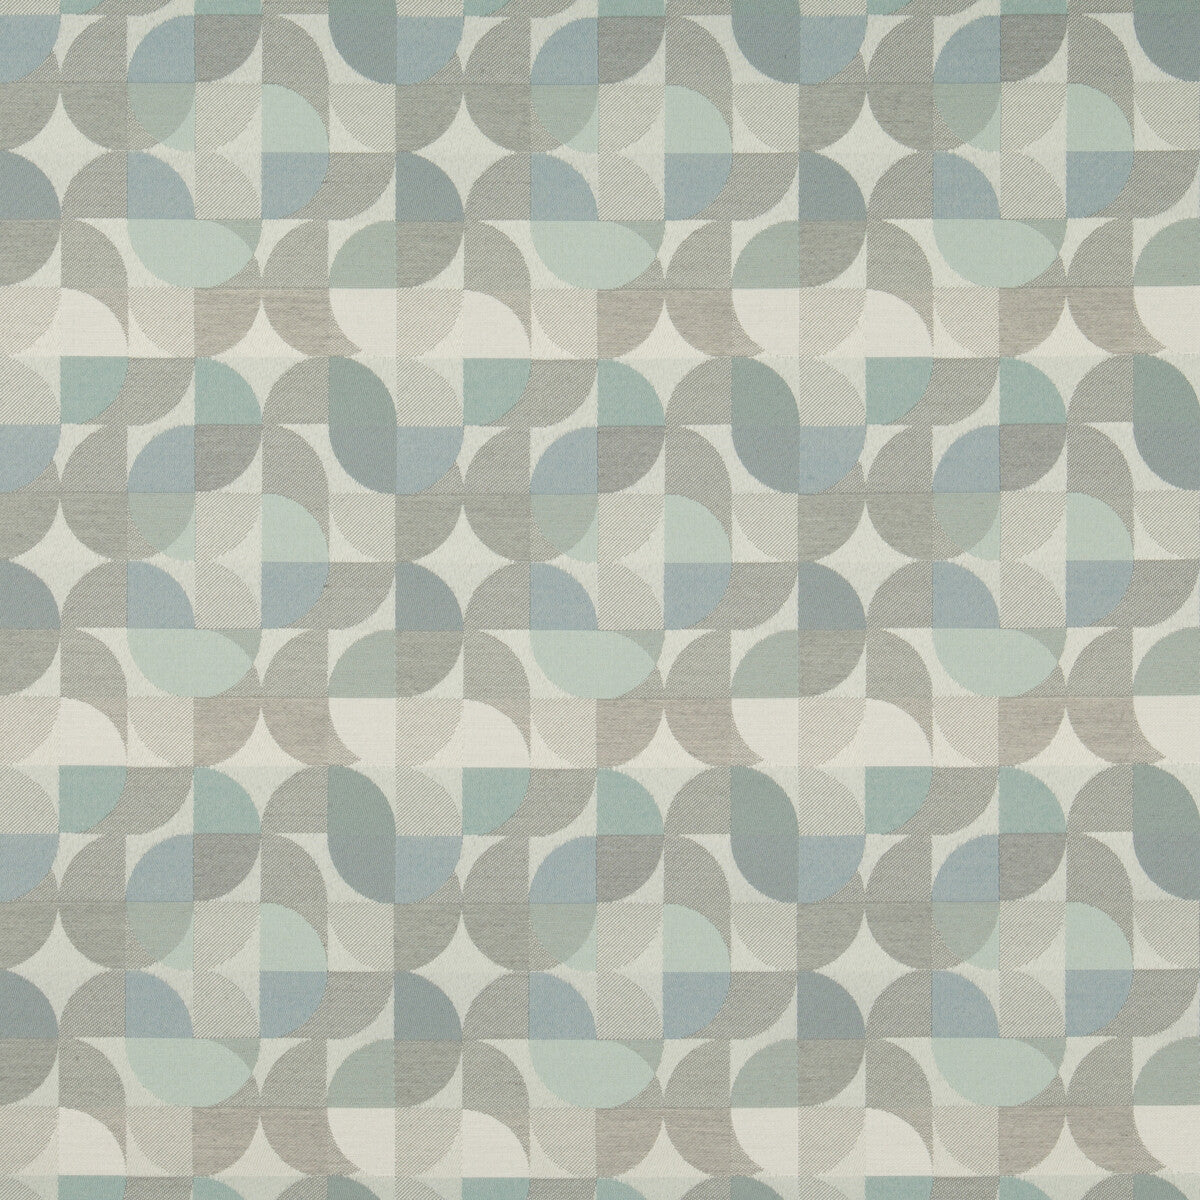 Mix Up fabric in mineral color - pattern 35090.1511.0 - by Kravet Contract in the Gis Crypton collection